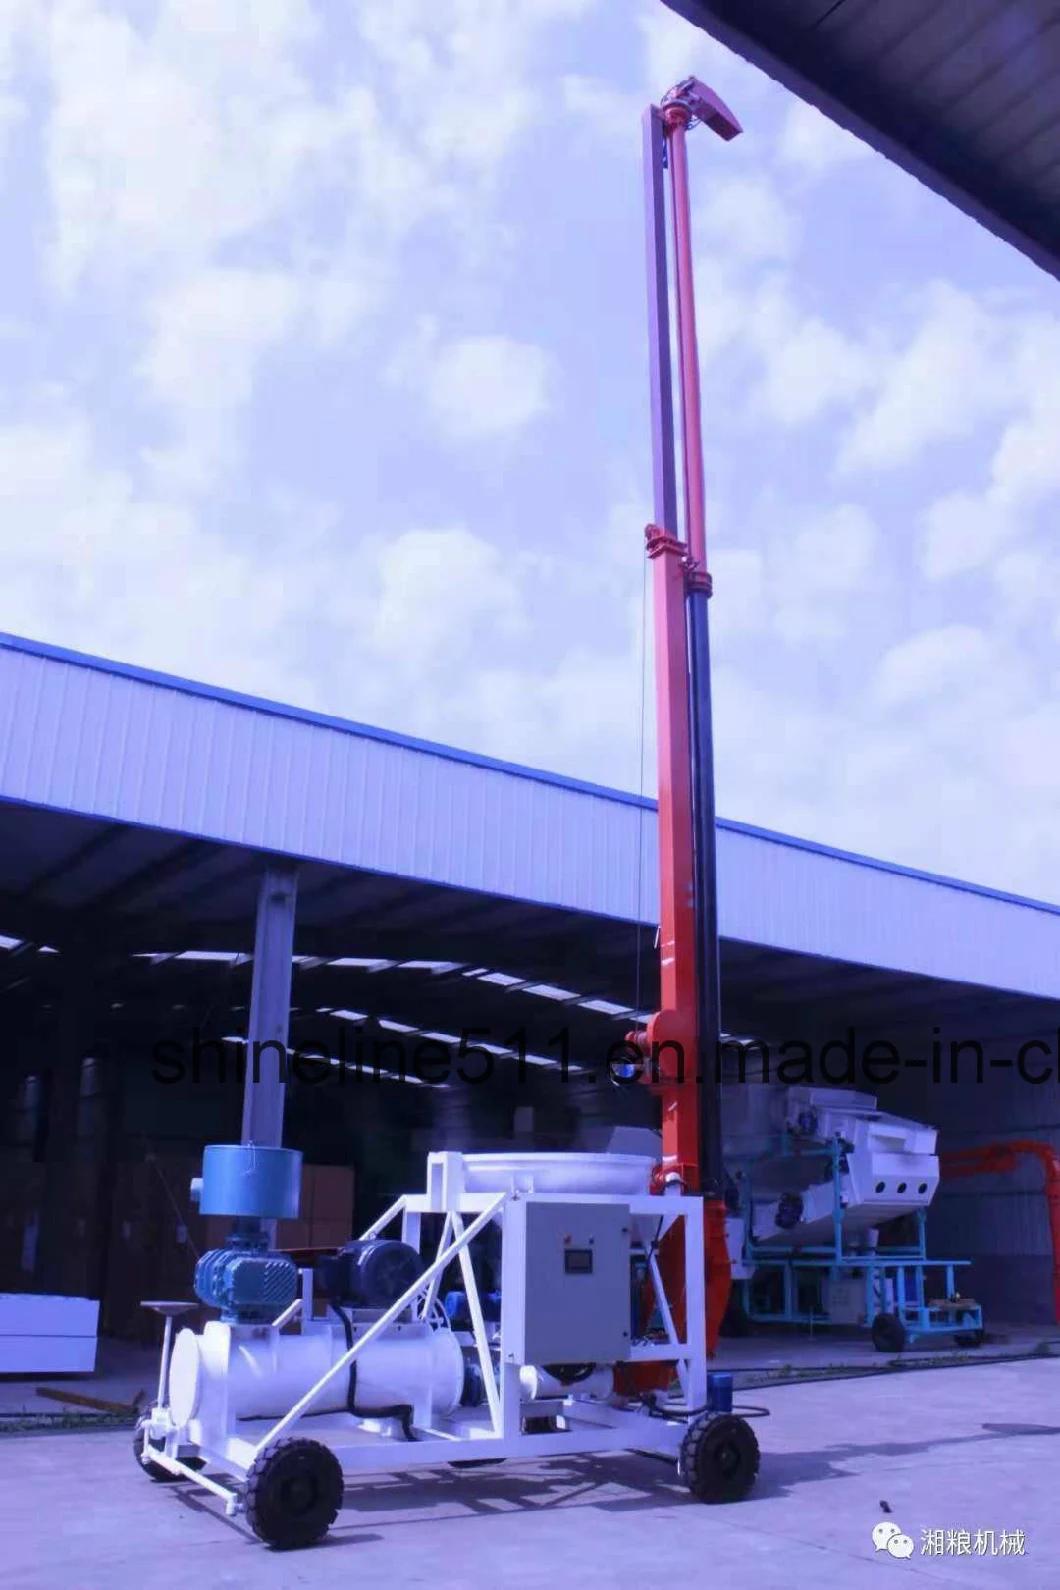 Available New Xiangliang Brand Standard Exportatiion Packing Hopper Storage Grain Unloader